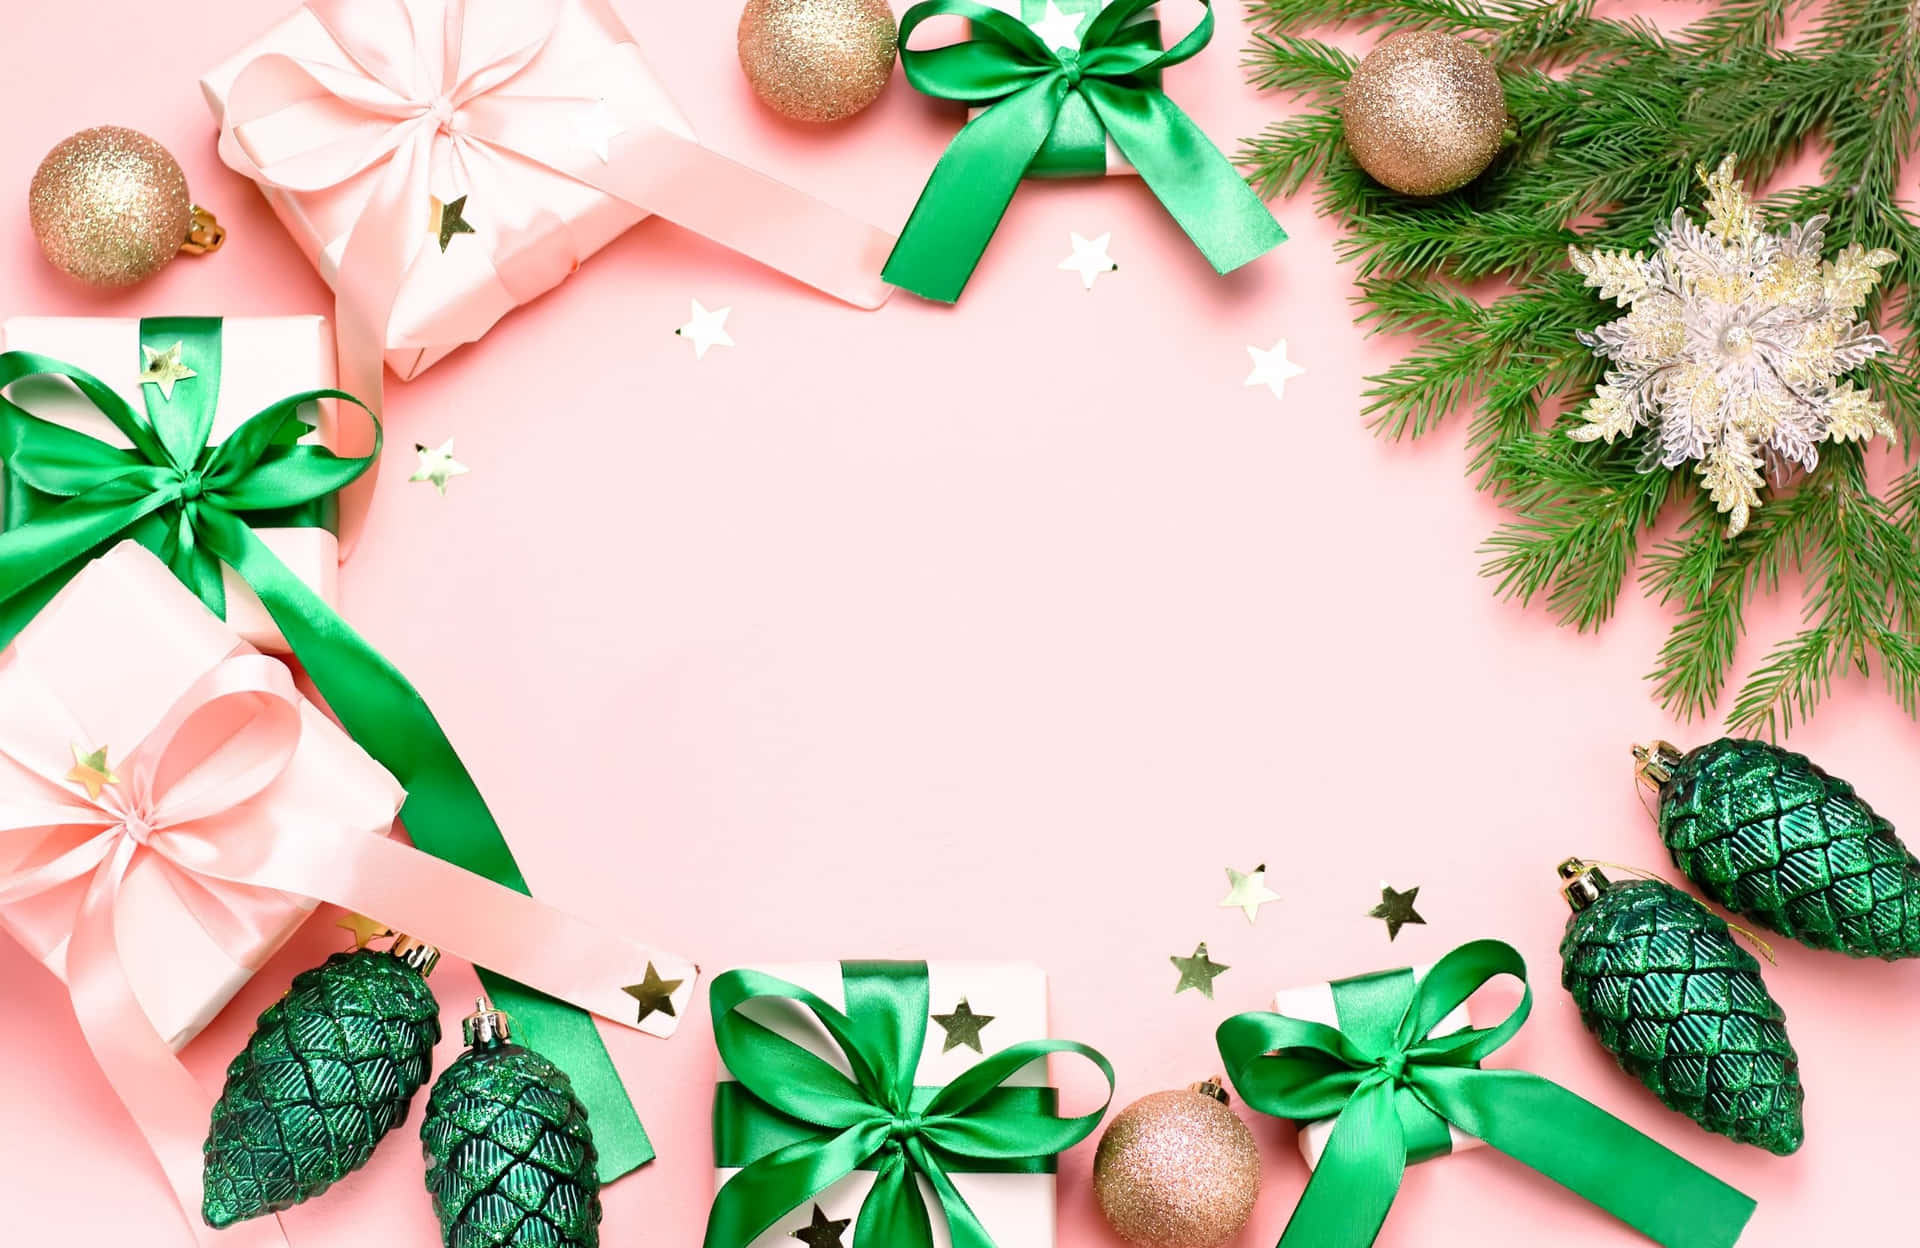 Download Christmas Presents On Pink Background With Green Ribbons ...